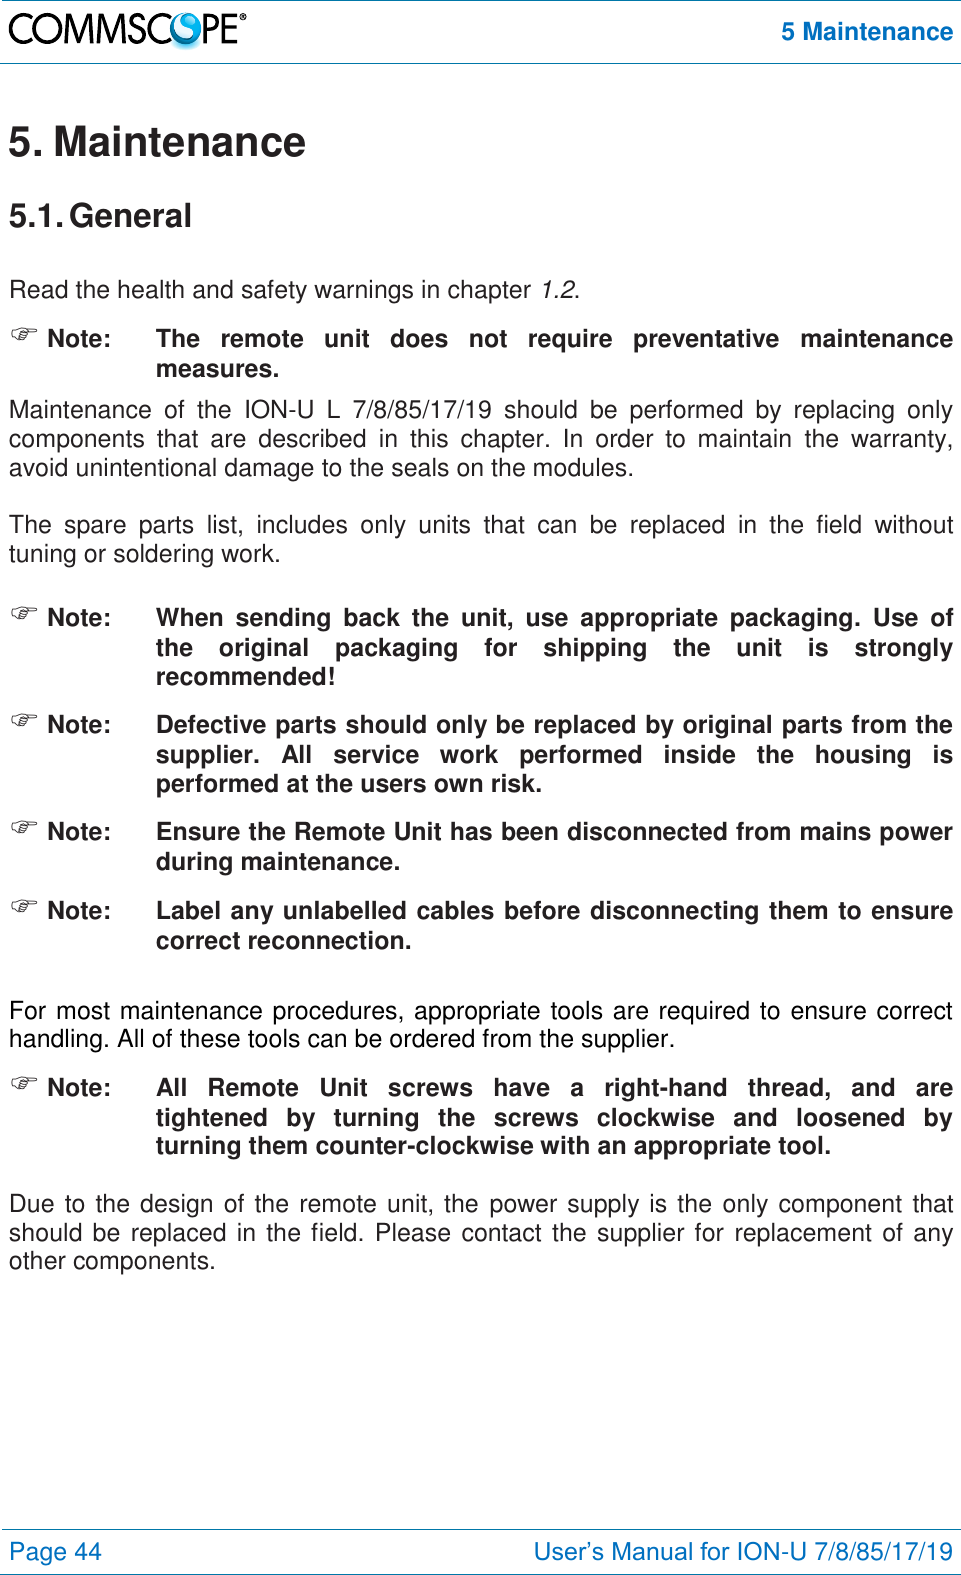  5 Maintenance  Page 44 User’s Manual for ION-U 7/8/85/17/19  5. Maintenance 5.1. General  Read the health and safety warnings in chapter 1.2.  Note:  The  remote  unit  does  not  require  preventative  maintenance measures. Maintenance  of  the  ION-U  L  7/8/85/17/19  should  be  performed  by  replacing  only components  that  are  described  in  this  chapter.  In  order  to  maintain  the  warranty, avoid unintentional damage to the seals on the modules.  The  spare  parts  list,  includes  only  units  that  can  be  replaced  in  the  field  without tuning or soldering work.   Note:  When  sending  back  the  unit,  use  appropriate  packaging.  Use  of the  original  packaging  for  shipping  the  unit  is  strongly recommended!  Note:  Defective parts should only be replaced by original parts from the supplier.  All  service  work  performed  inside  the  housing  is performed at the users own risk.  Note:  Ensure the Remote Unit has been disconnected from mains power during maintenance.  Note:  Label any unlabelled cables before disconnecting them to ensure correct reconnection.  For most maintenance procedures, appropriate tools are required to ensure correct handling. All of these tools can be ordered from the supplier.   Note:   All  Remote  Unit  screws  have  a  right-hand  thread,  and  are tightened  by  turning  the  screws  clockwise  and  loosened  by turning them counter-clockwise with an appropriate tool.  Due to the design of the remote unit, the  power supply is the only component that should be replaced in the field. Please contact the supplier for replacement of any other components.  